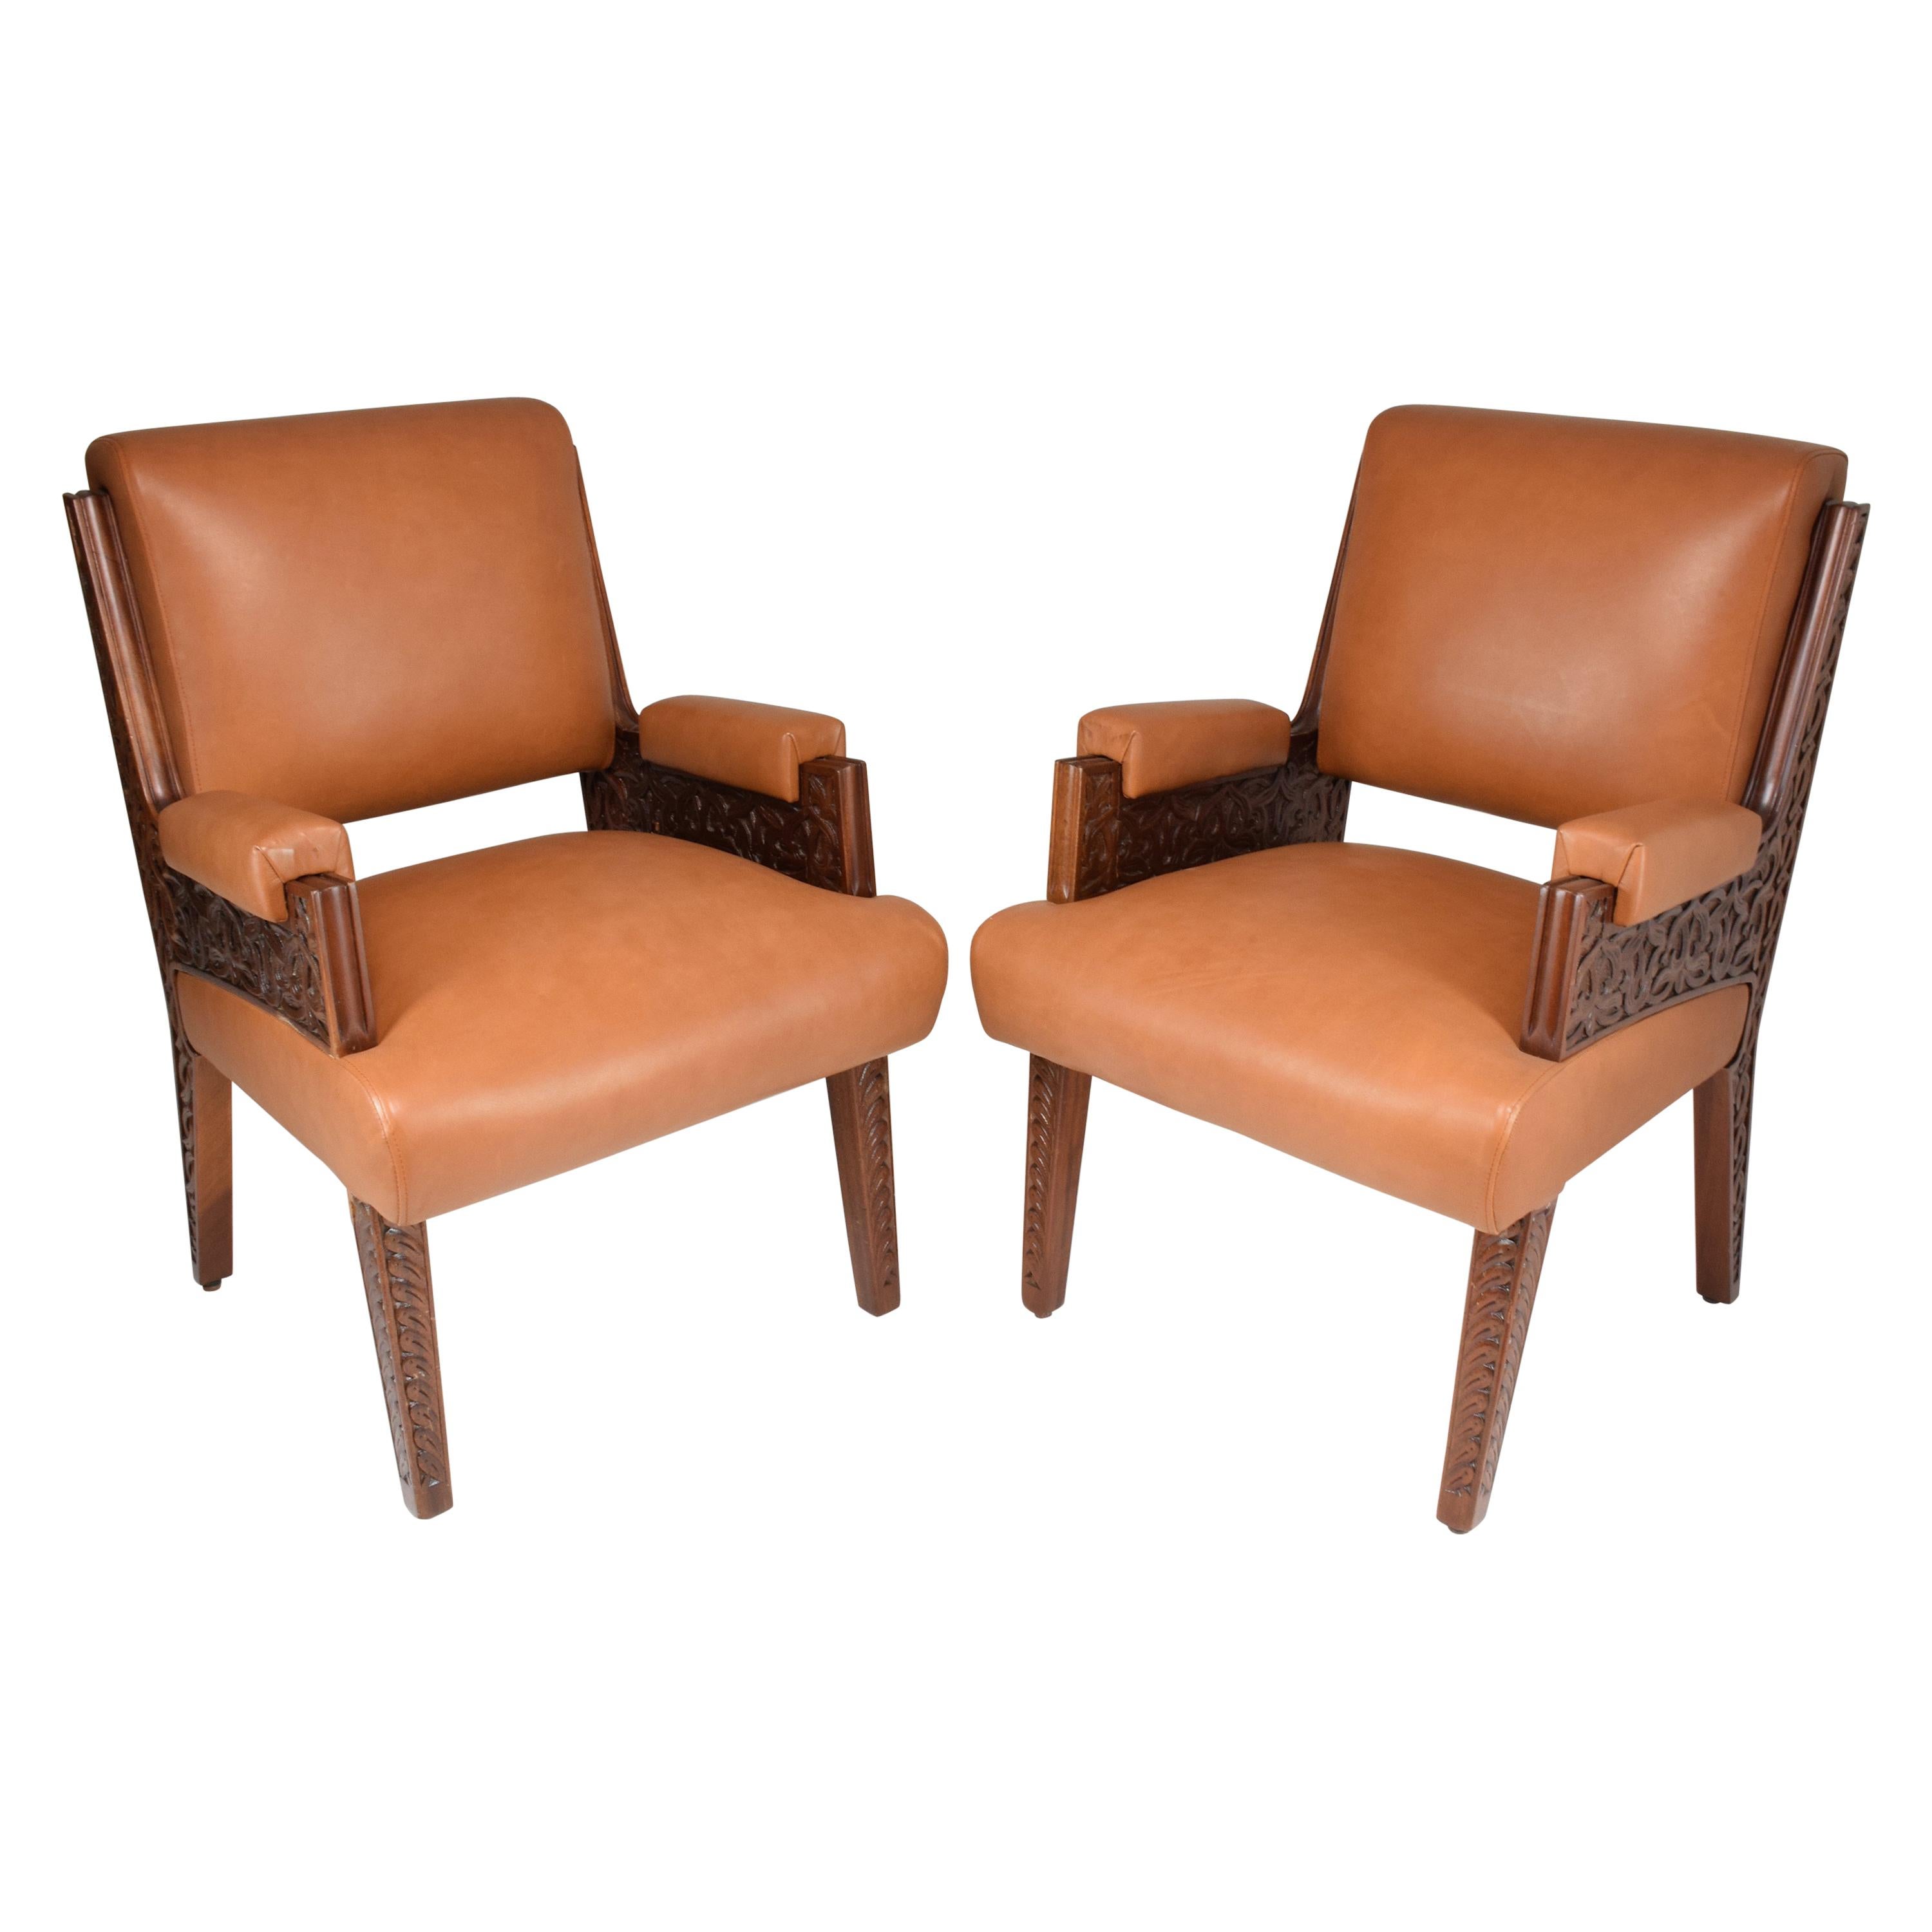 An exceptional set of two mid-century office or side armchairs that were produced for the Moroccan Royal secretary office in the 1950's. These collectible pieces are highlighted by their art deco design and intricate hand-carved Moorish wooden